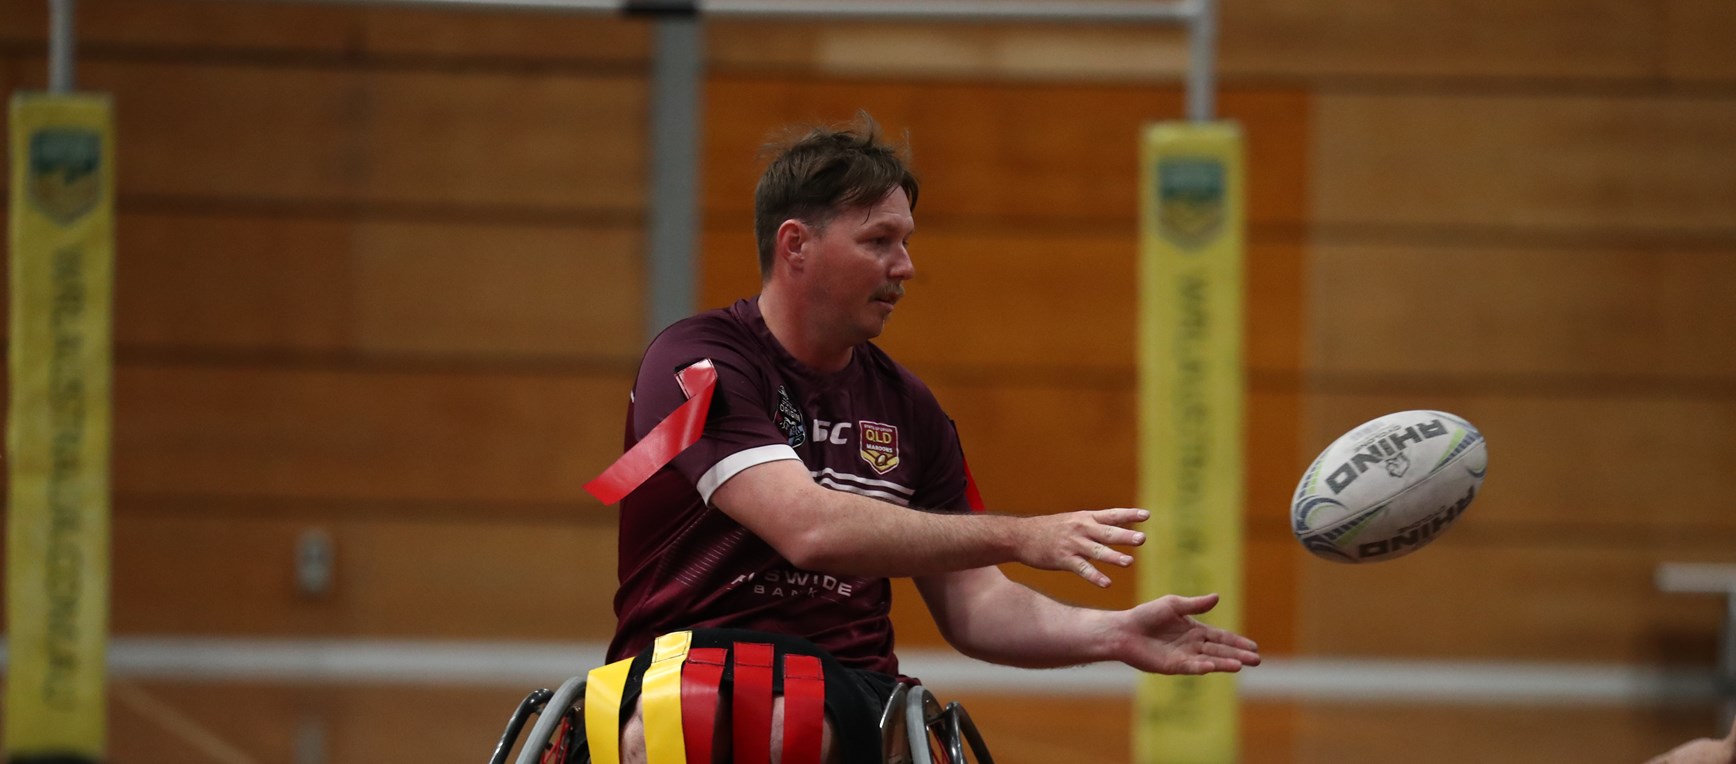 In pictures: Queensland wheelchair training camp